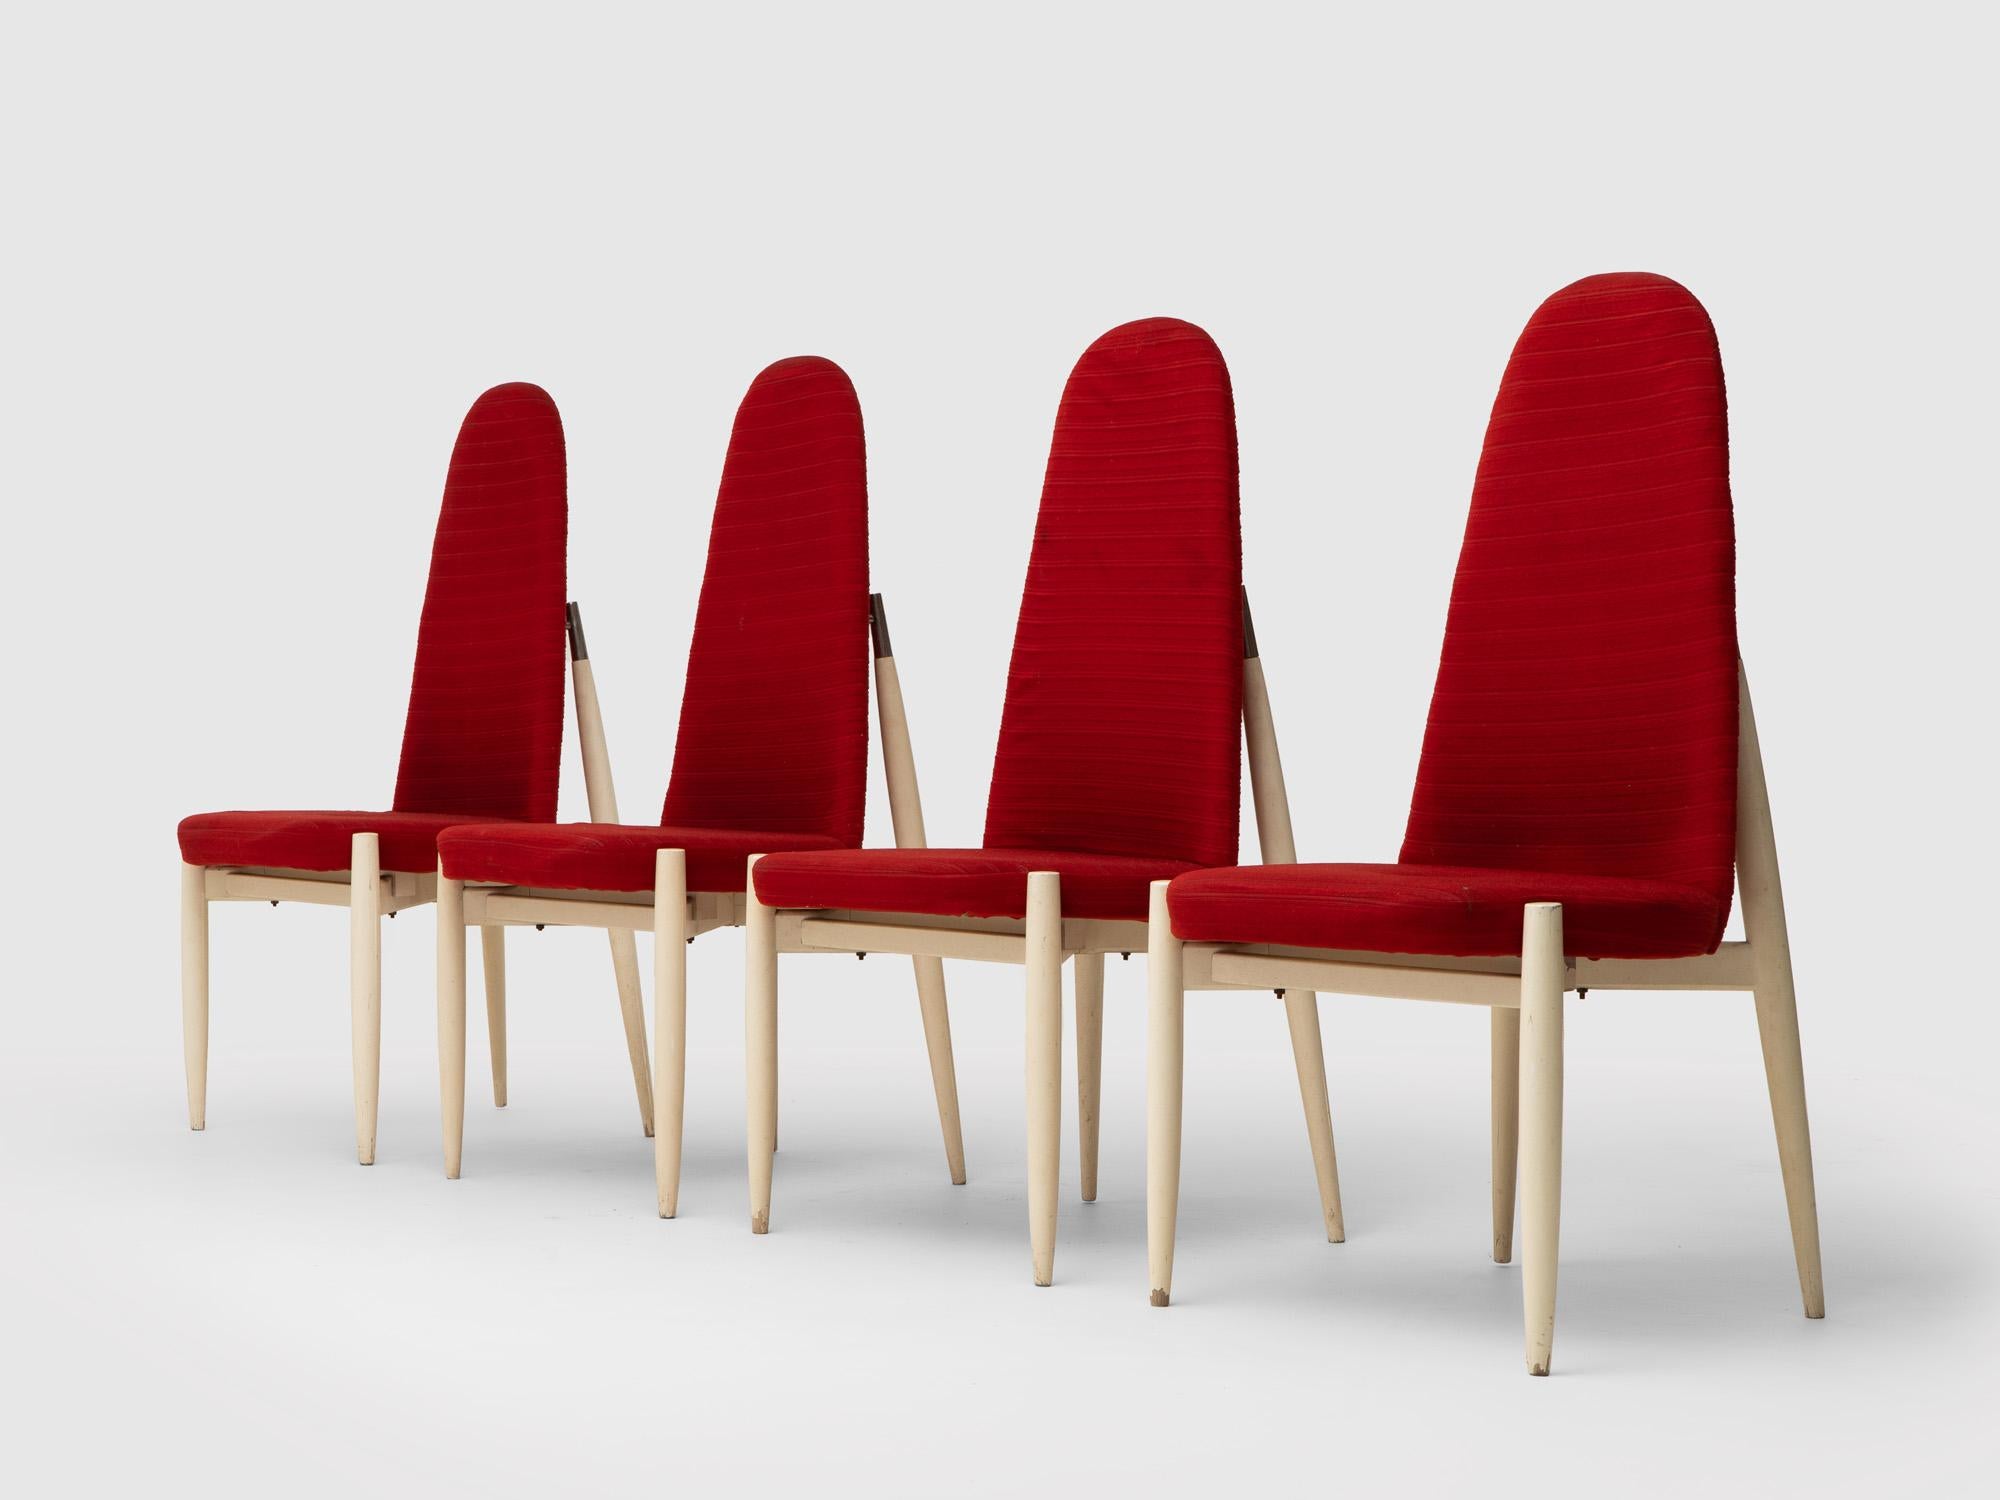 Set of 4 dining chairs by Miroslav Navratil, 1970s. Red upholstered seat and white painted structure. Original condition, upholstery to be updated. White painted wood construction with some paint looses on the leg ends.